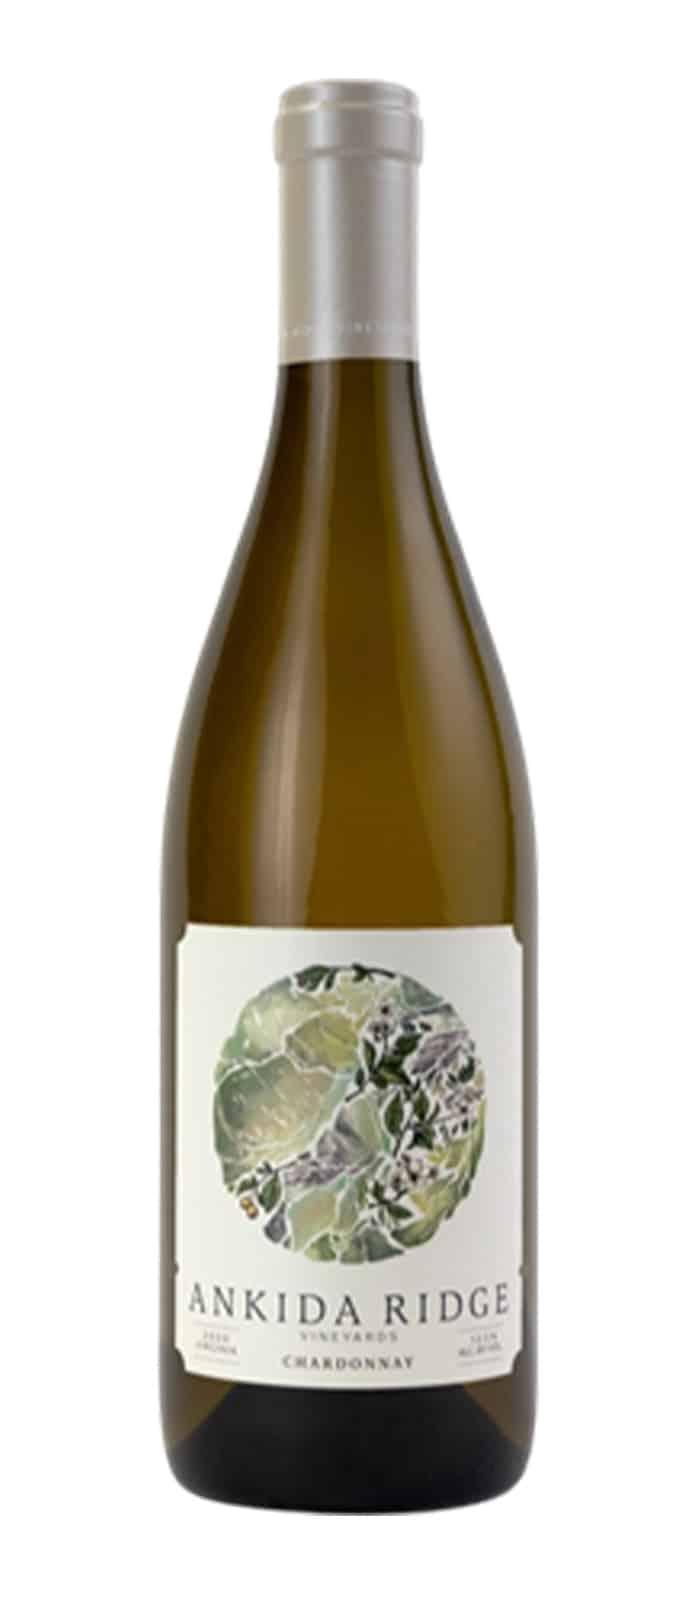 Bottle of Ankida Ridge Vineyards 2022 Chardonnay, Gold Medal, Virginia Governor's Cup Wine Competition.